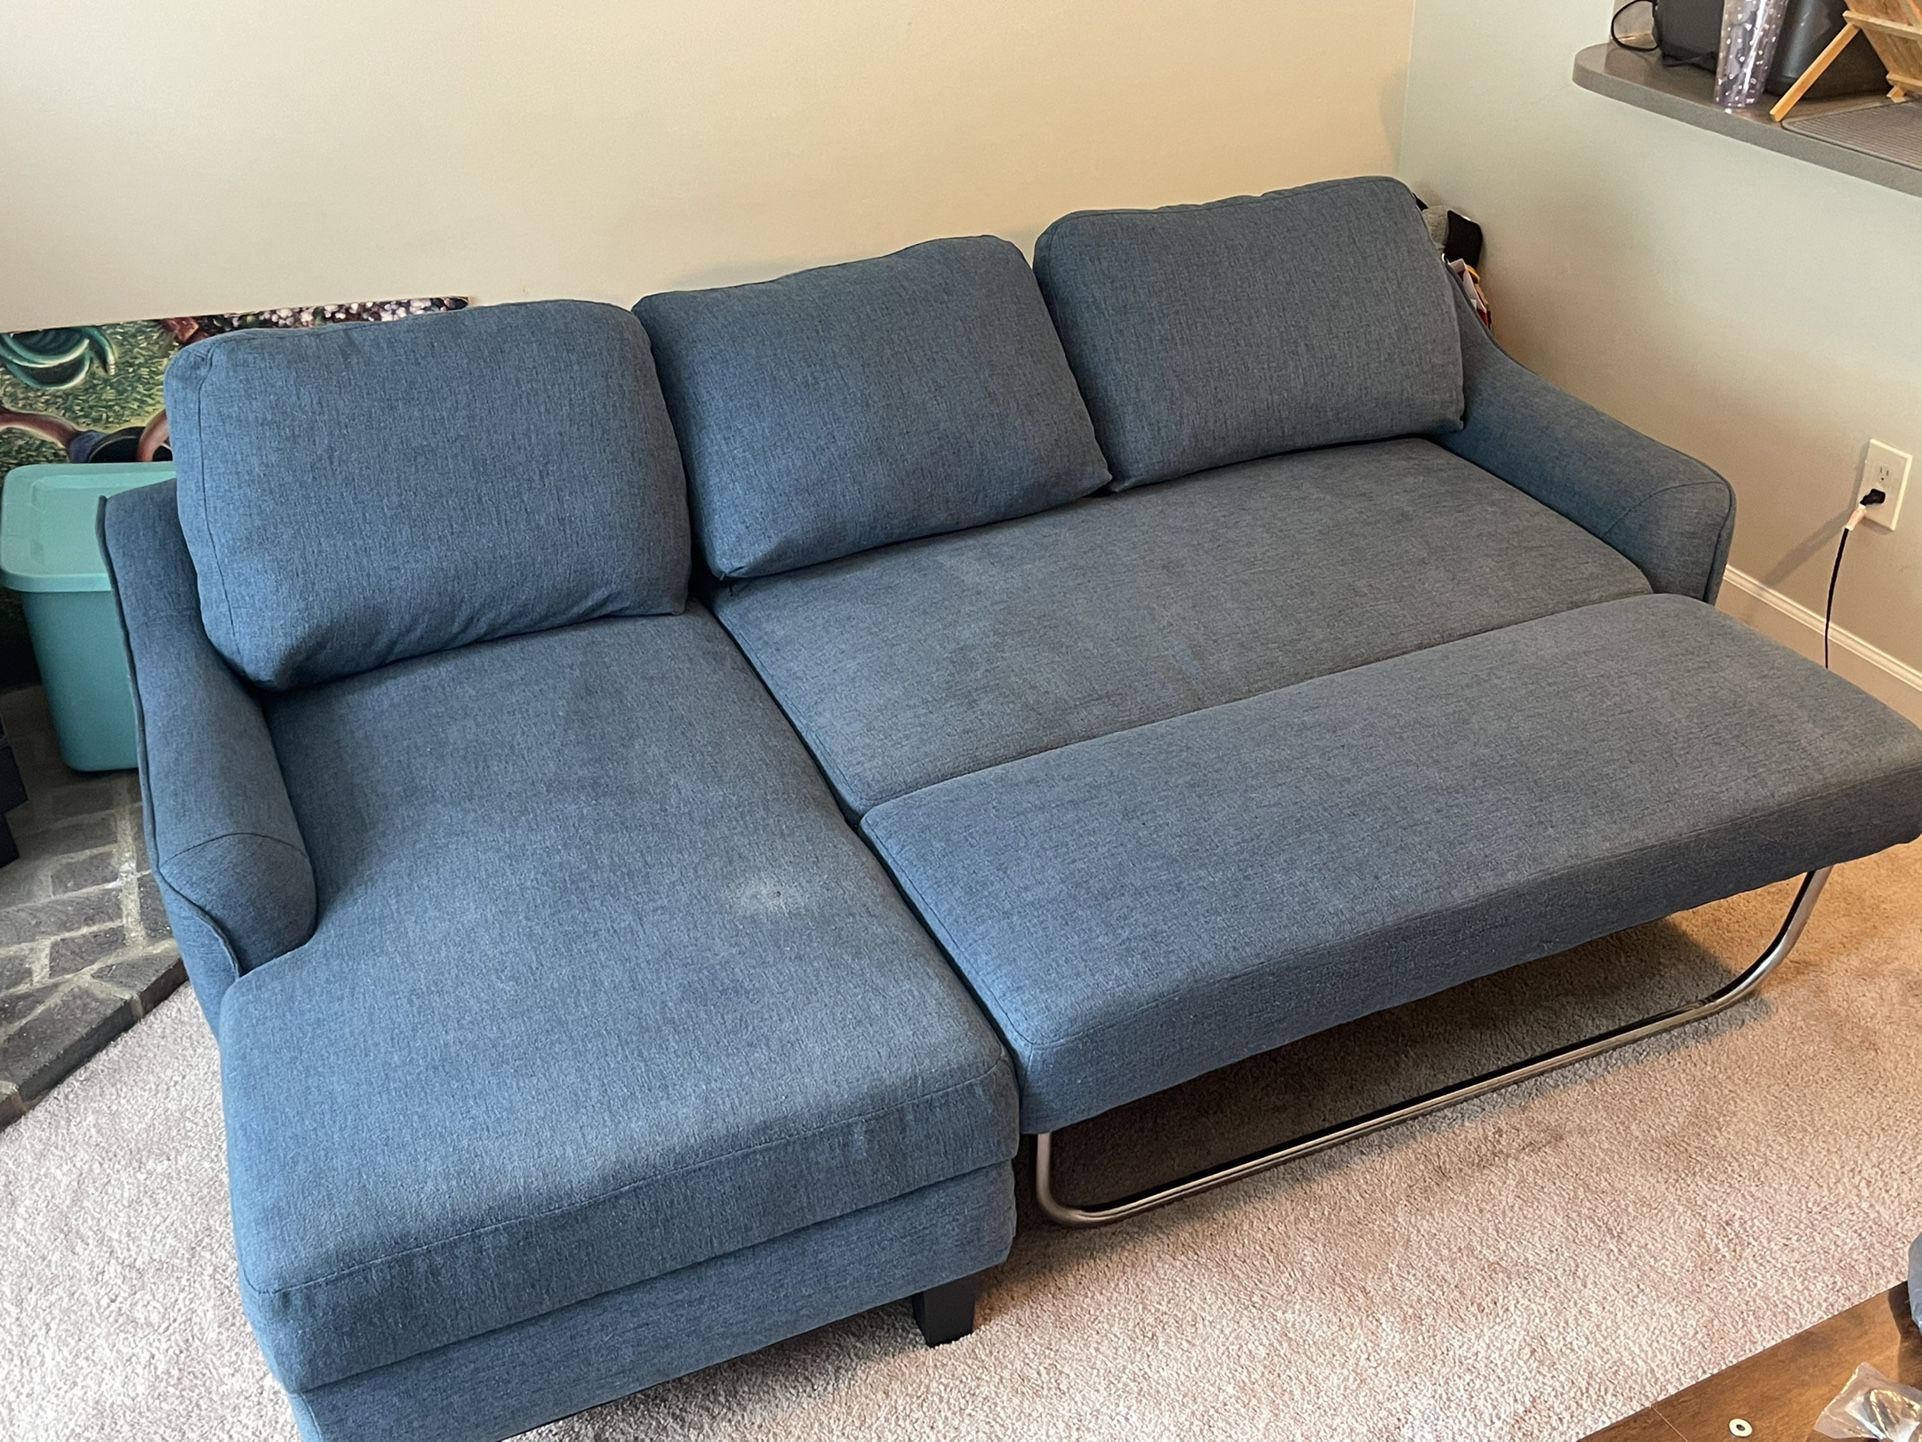 QUEEN SIZED PULL OUT COUCH 